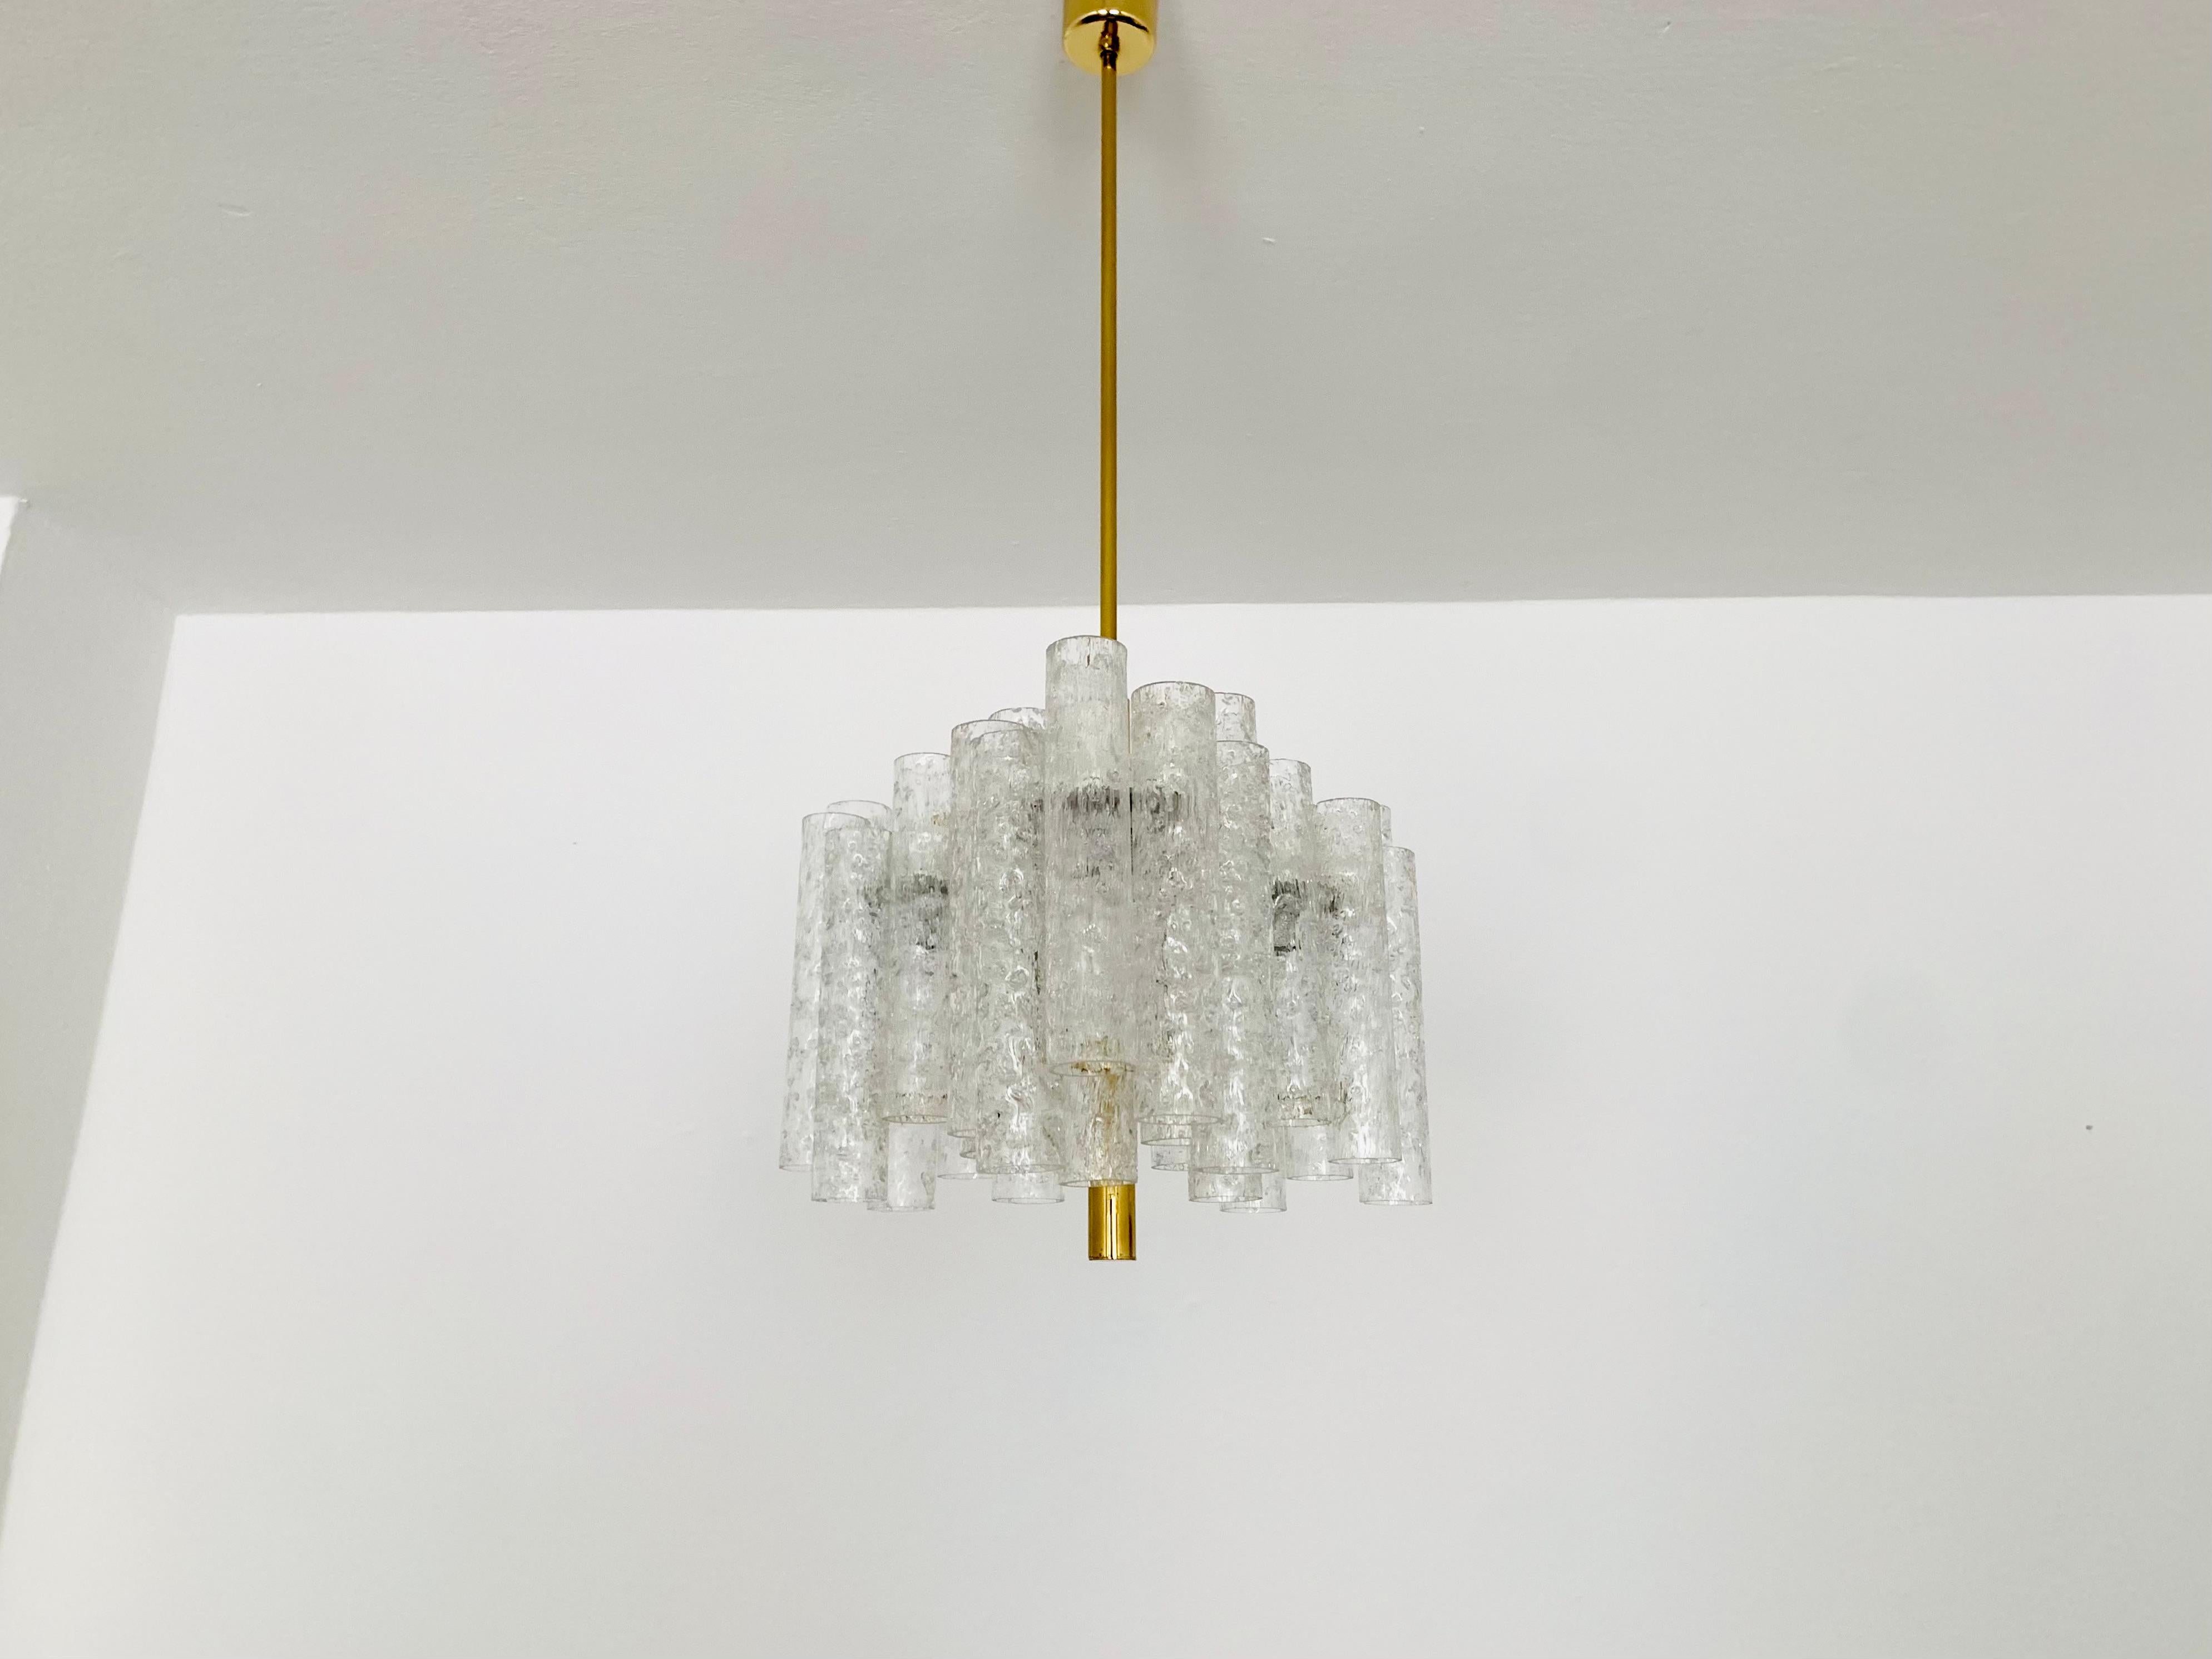 Fabulous ice glass chandelier from the 1960s.
The lamp with the 27 glasses is very noble and rare.
The structure in the glasses creates a spectacular play of light.
An absolute eye-catcher.

Manufacturer: Doria

Condition:

Very good vintage